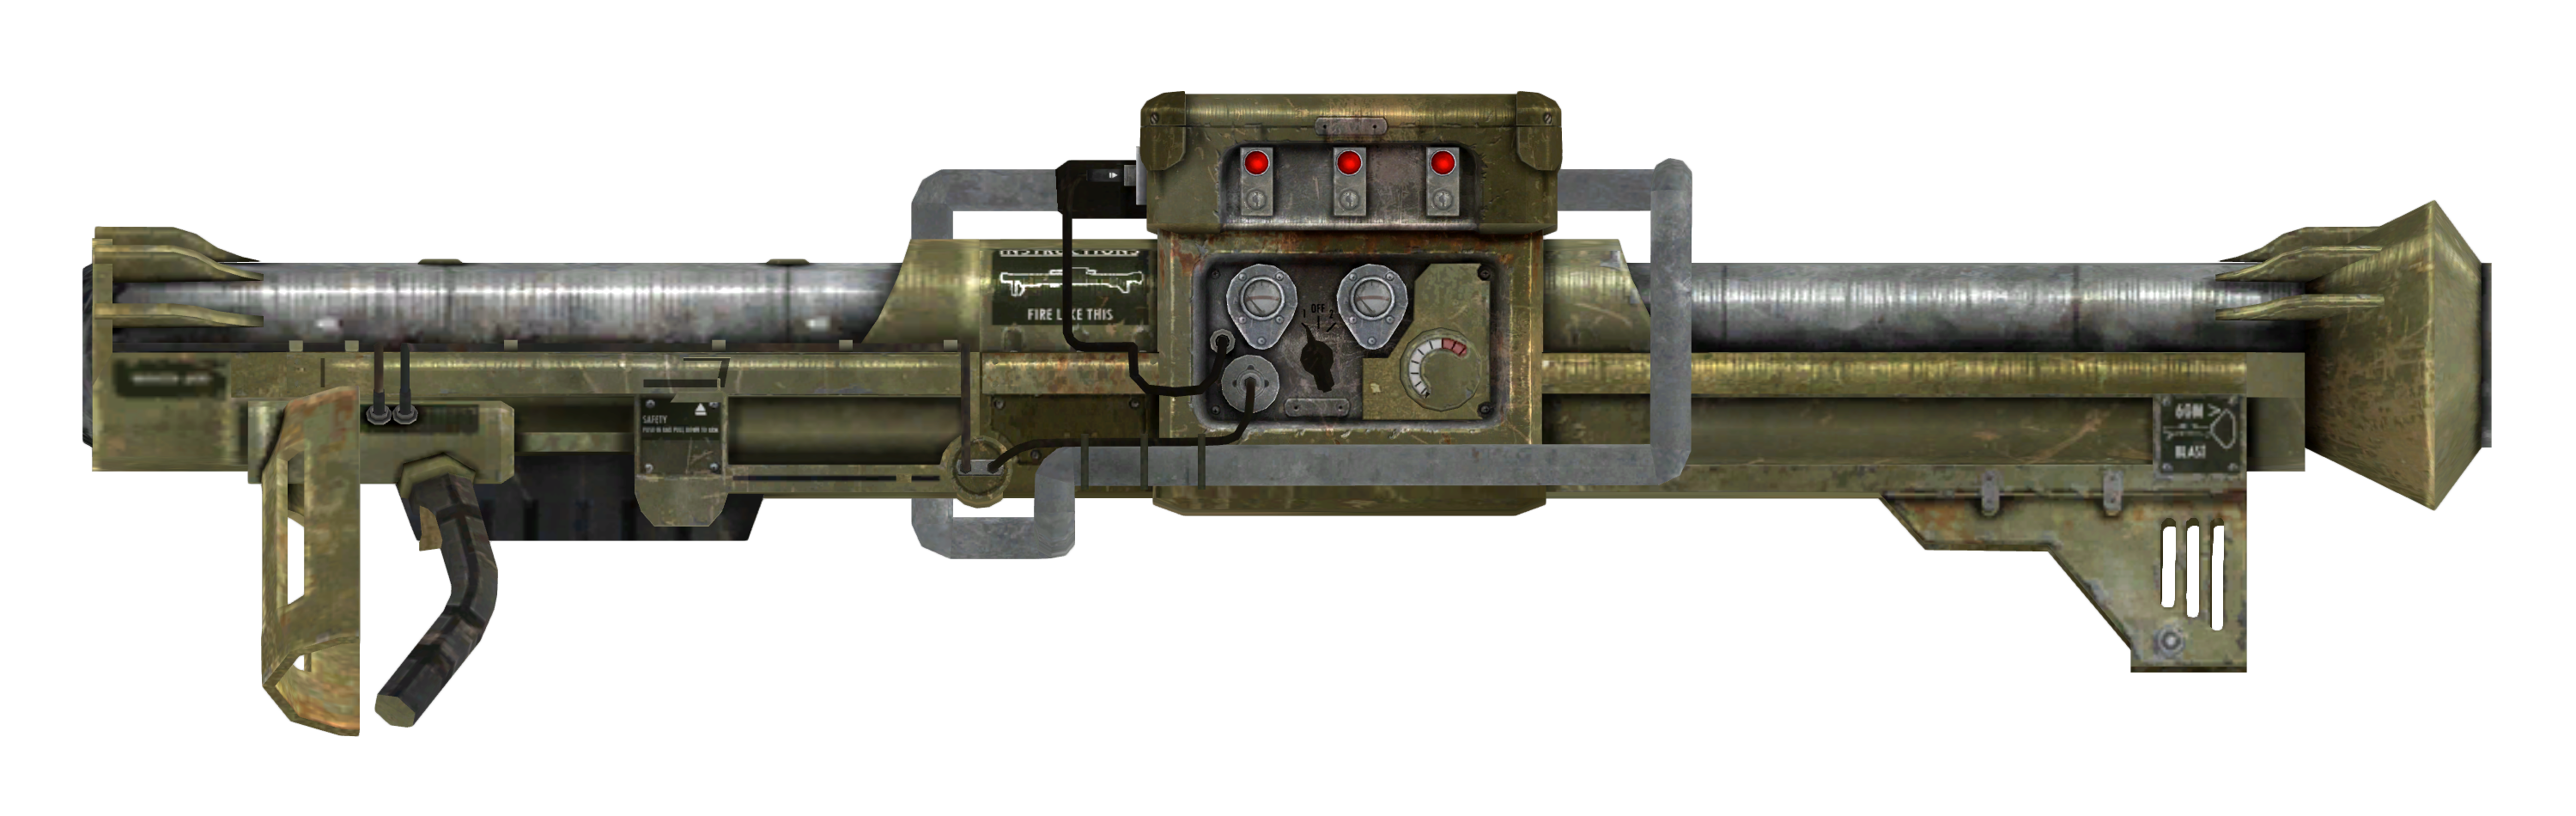 fallout shelter wiki missile launcher